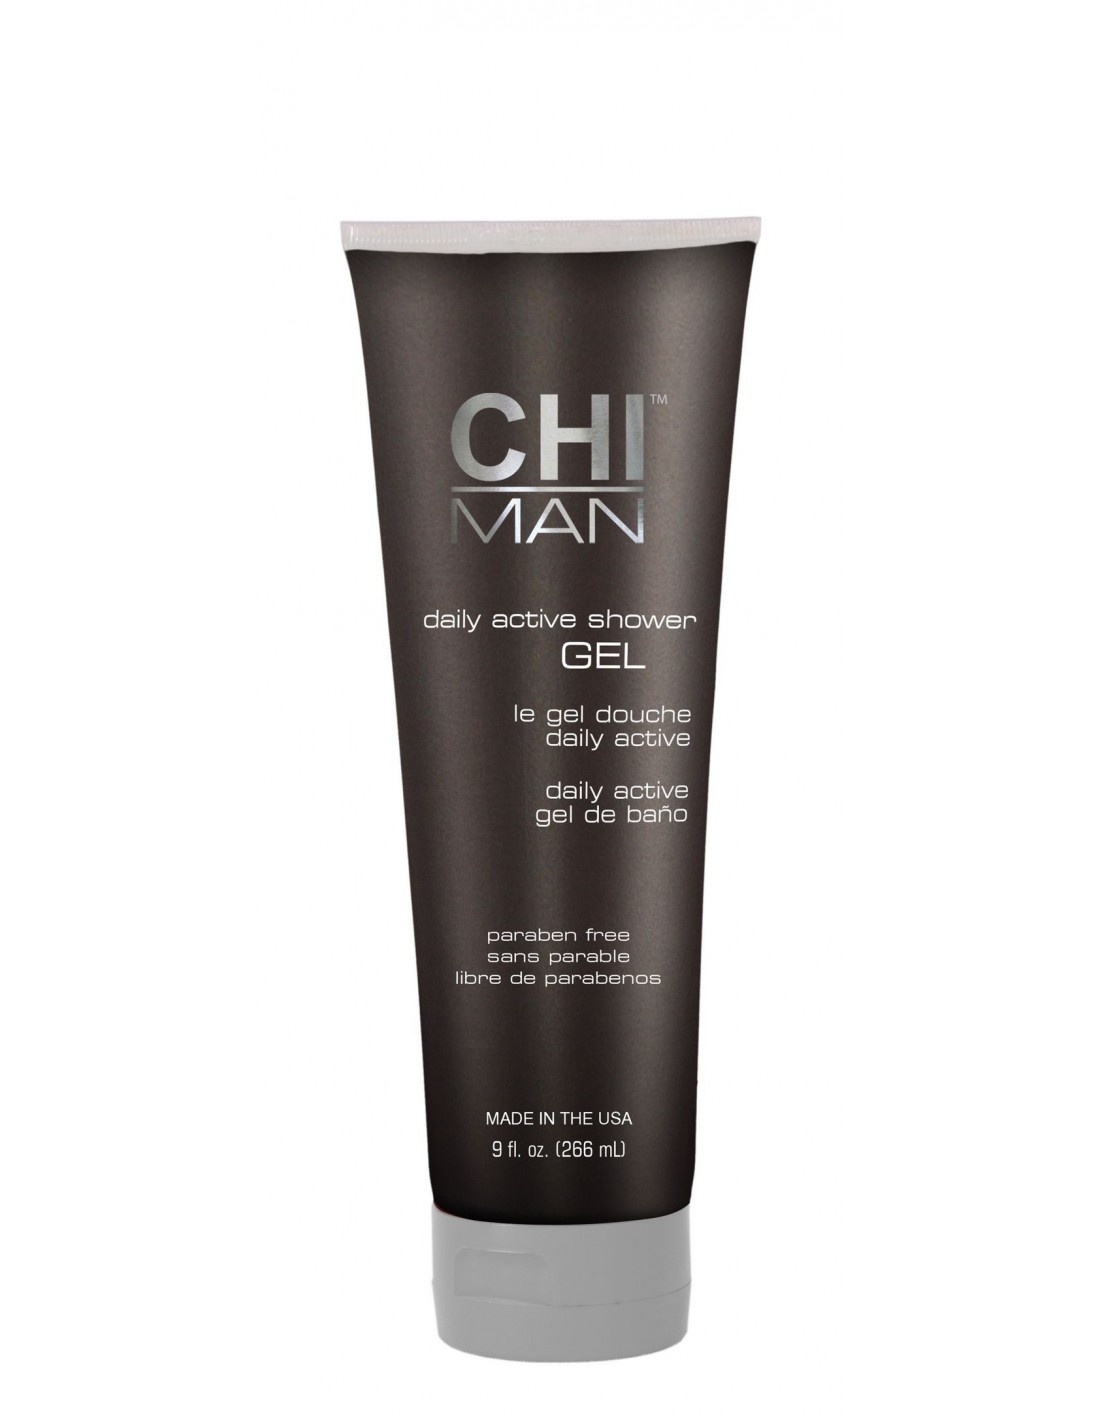 CHI Man Daily Active Shower Gel